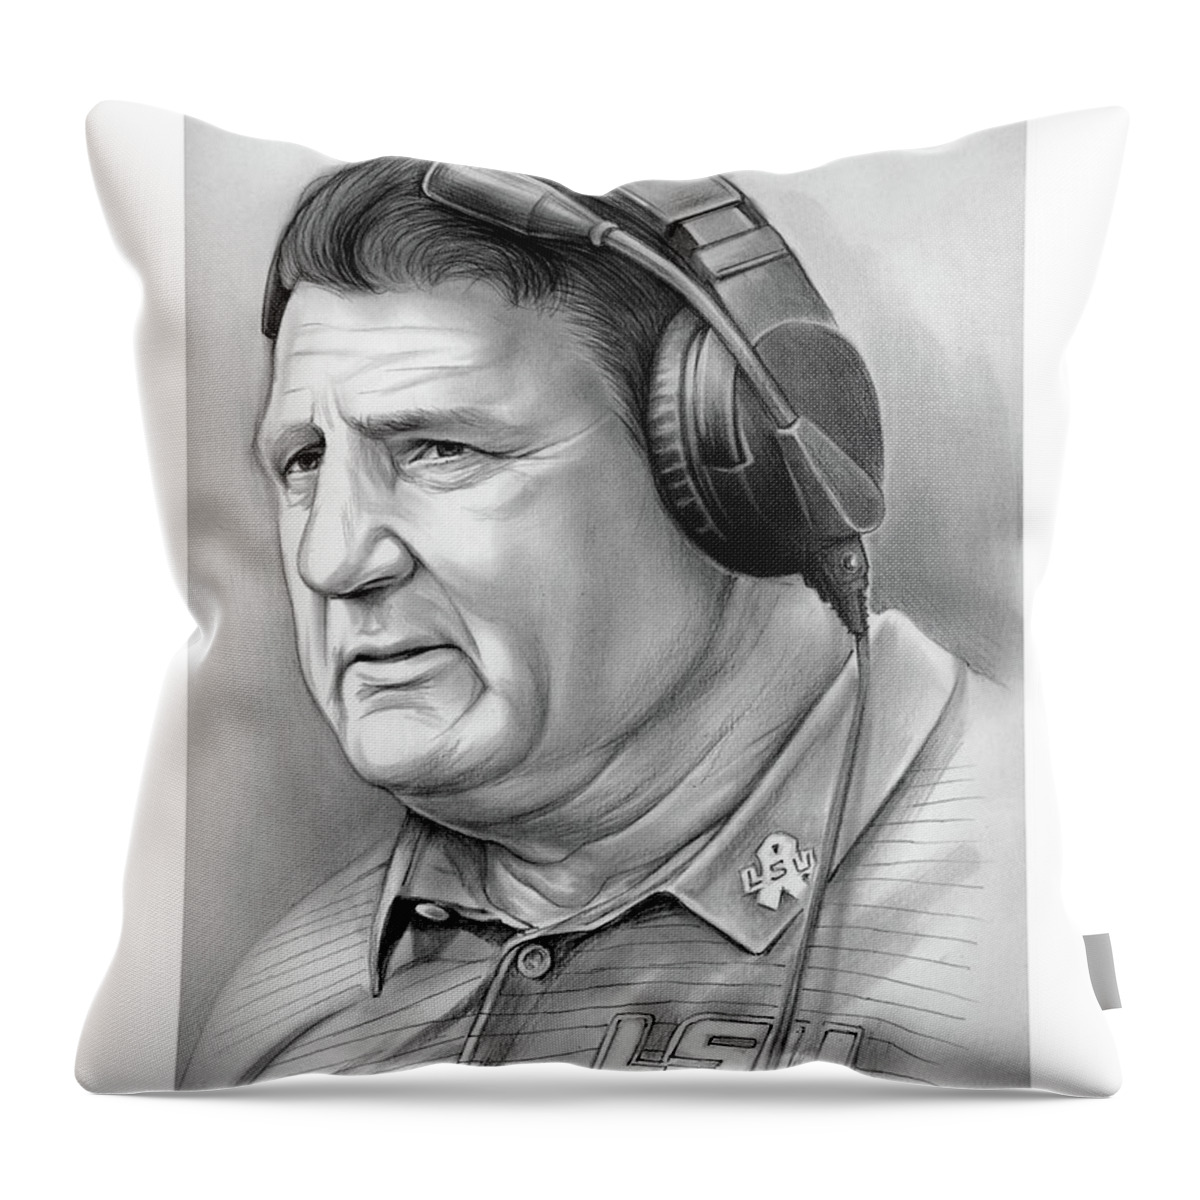 Ed Orgeron Throw Pillow featuring the drawing Coach Ed Orgeron by Greg Joens